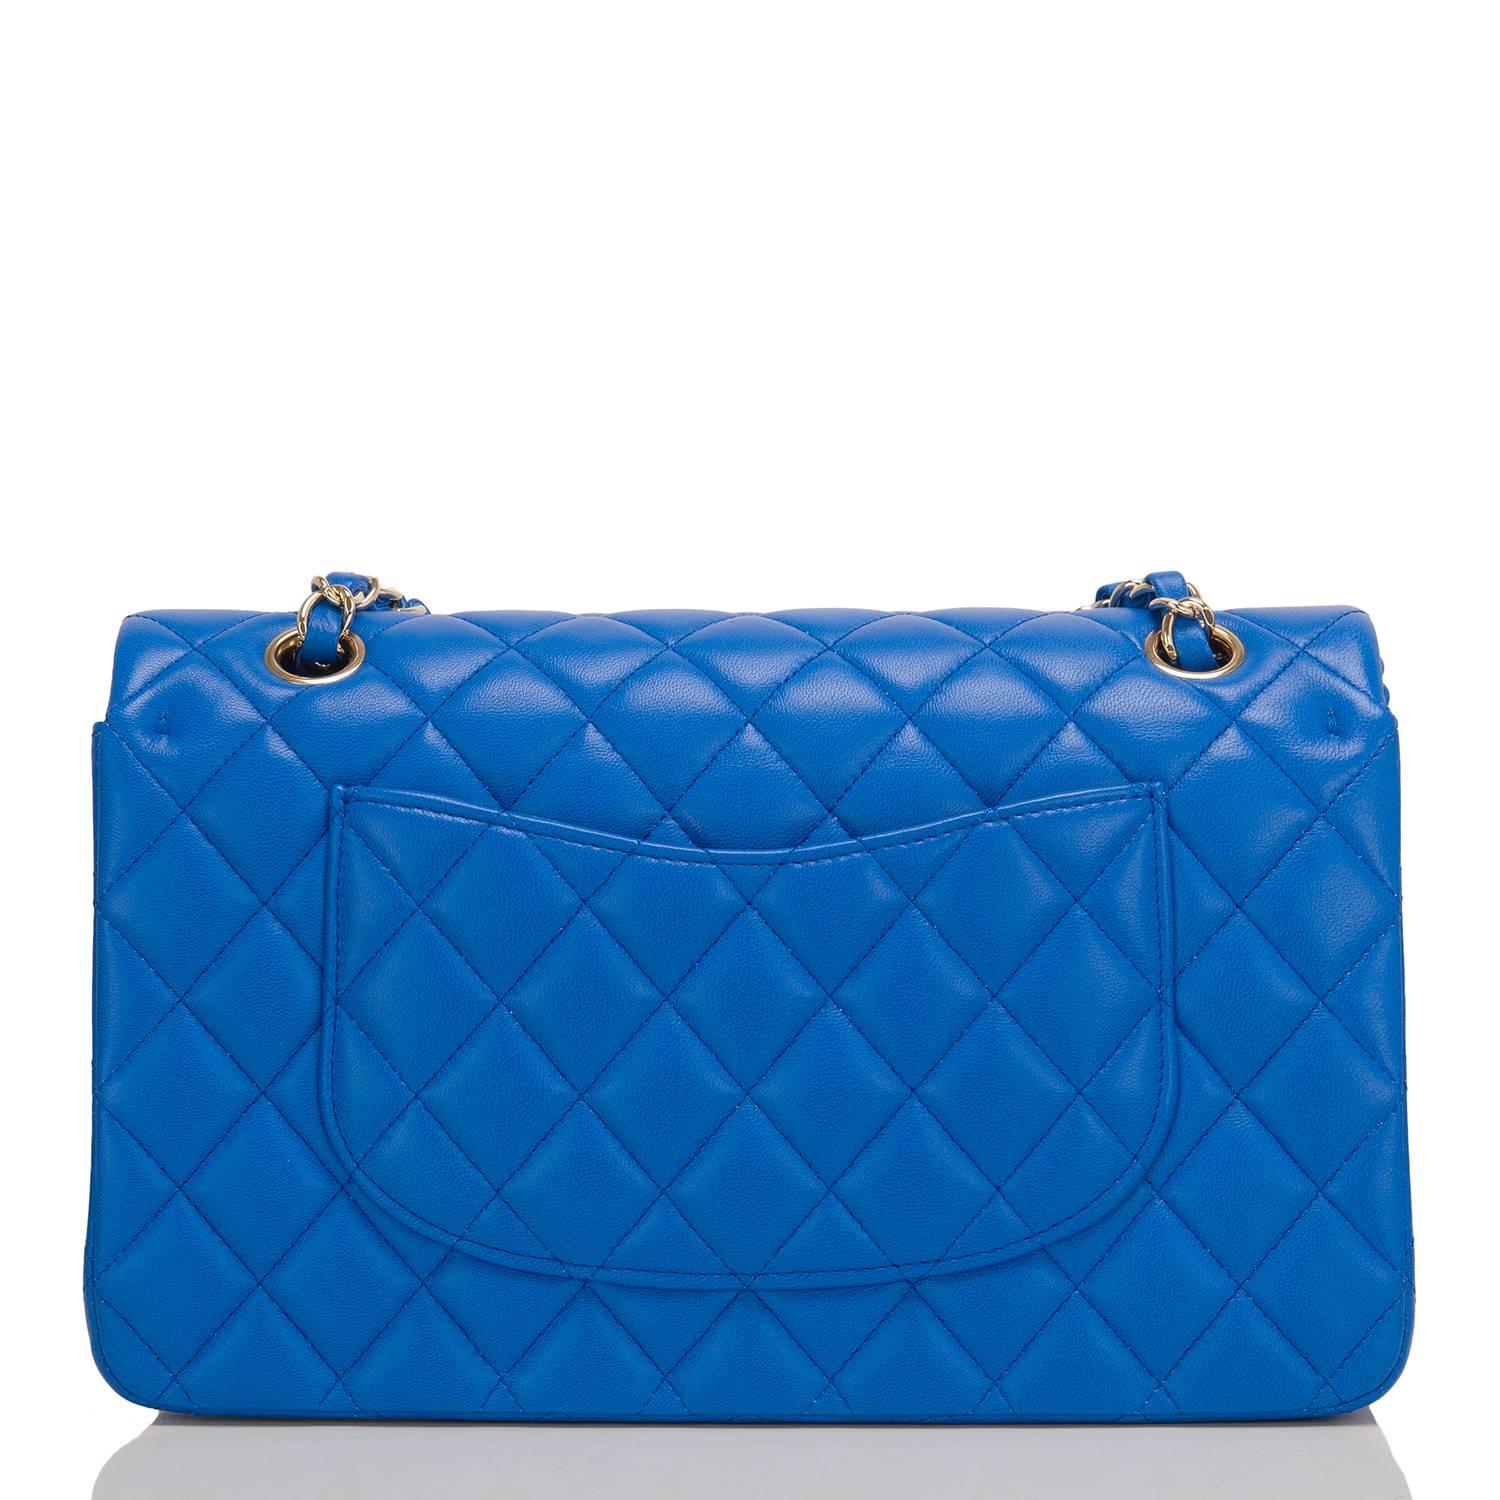 Chanel Blue Quilted Lambskin Medium Double Flap Bag In New Condition For Sale In New York, NY